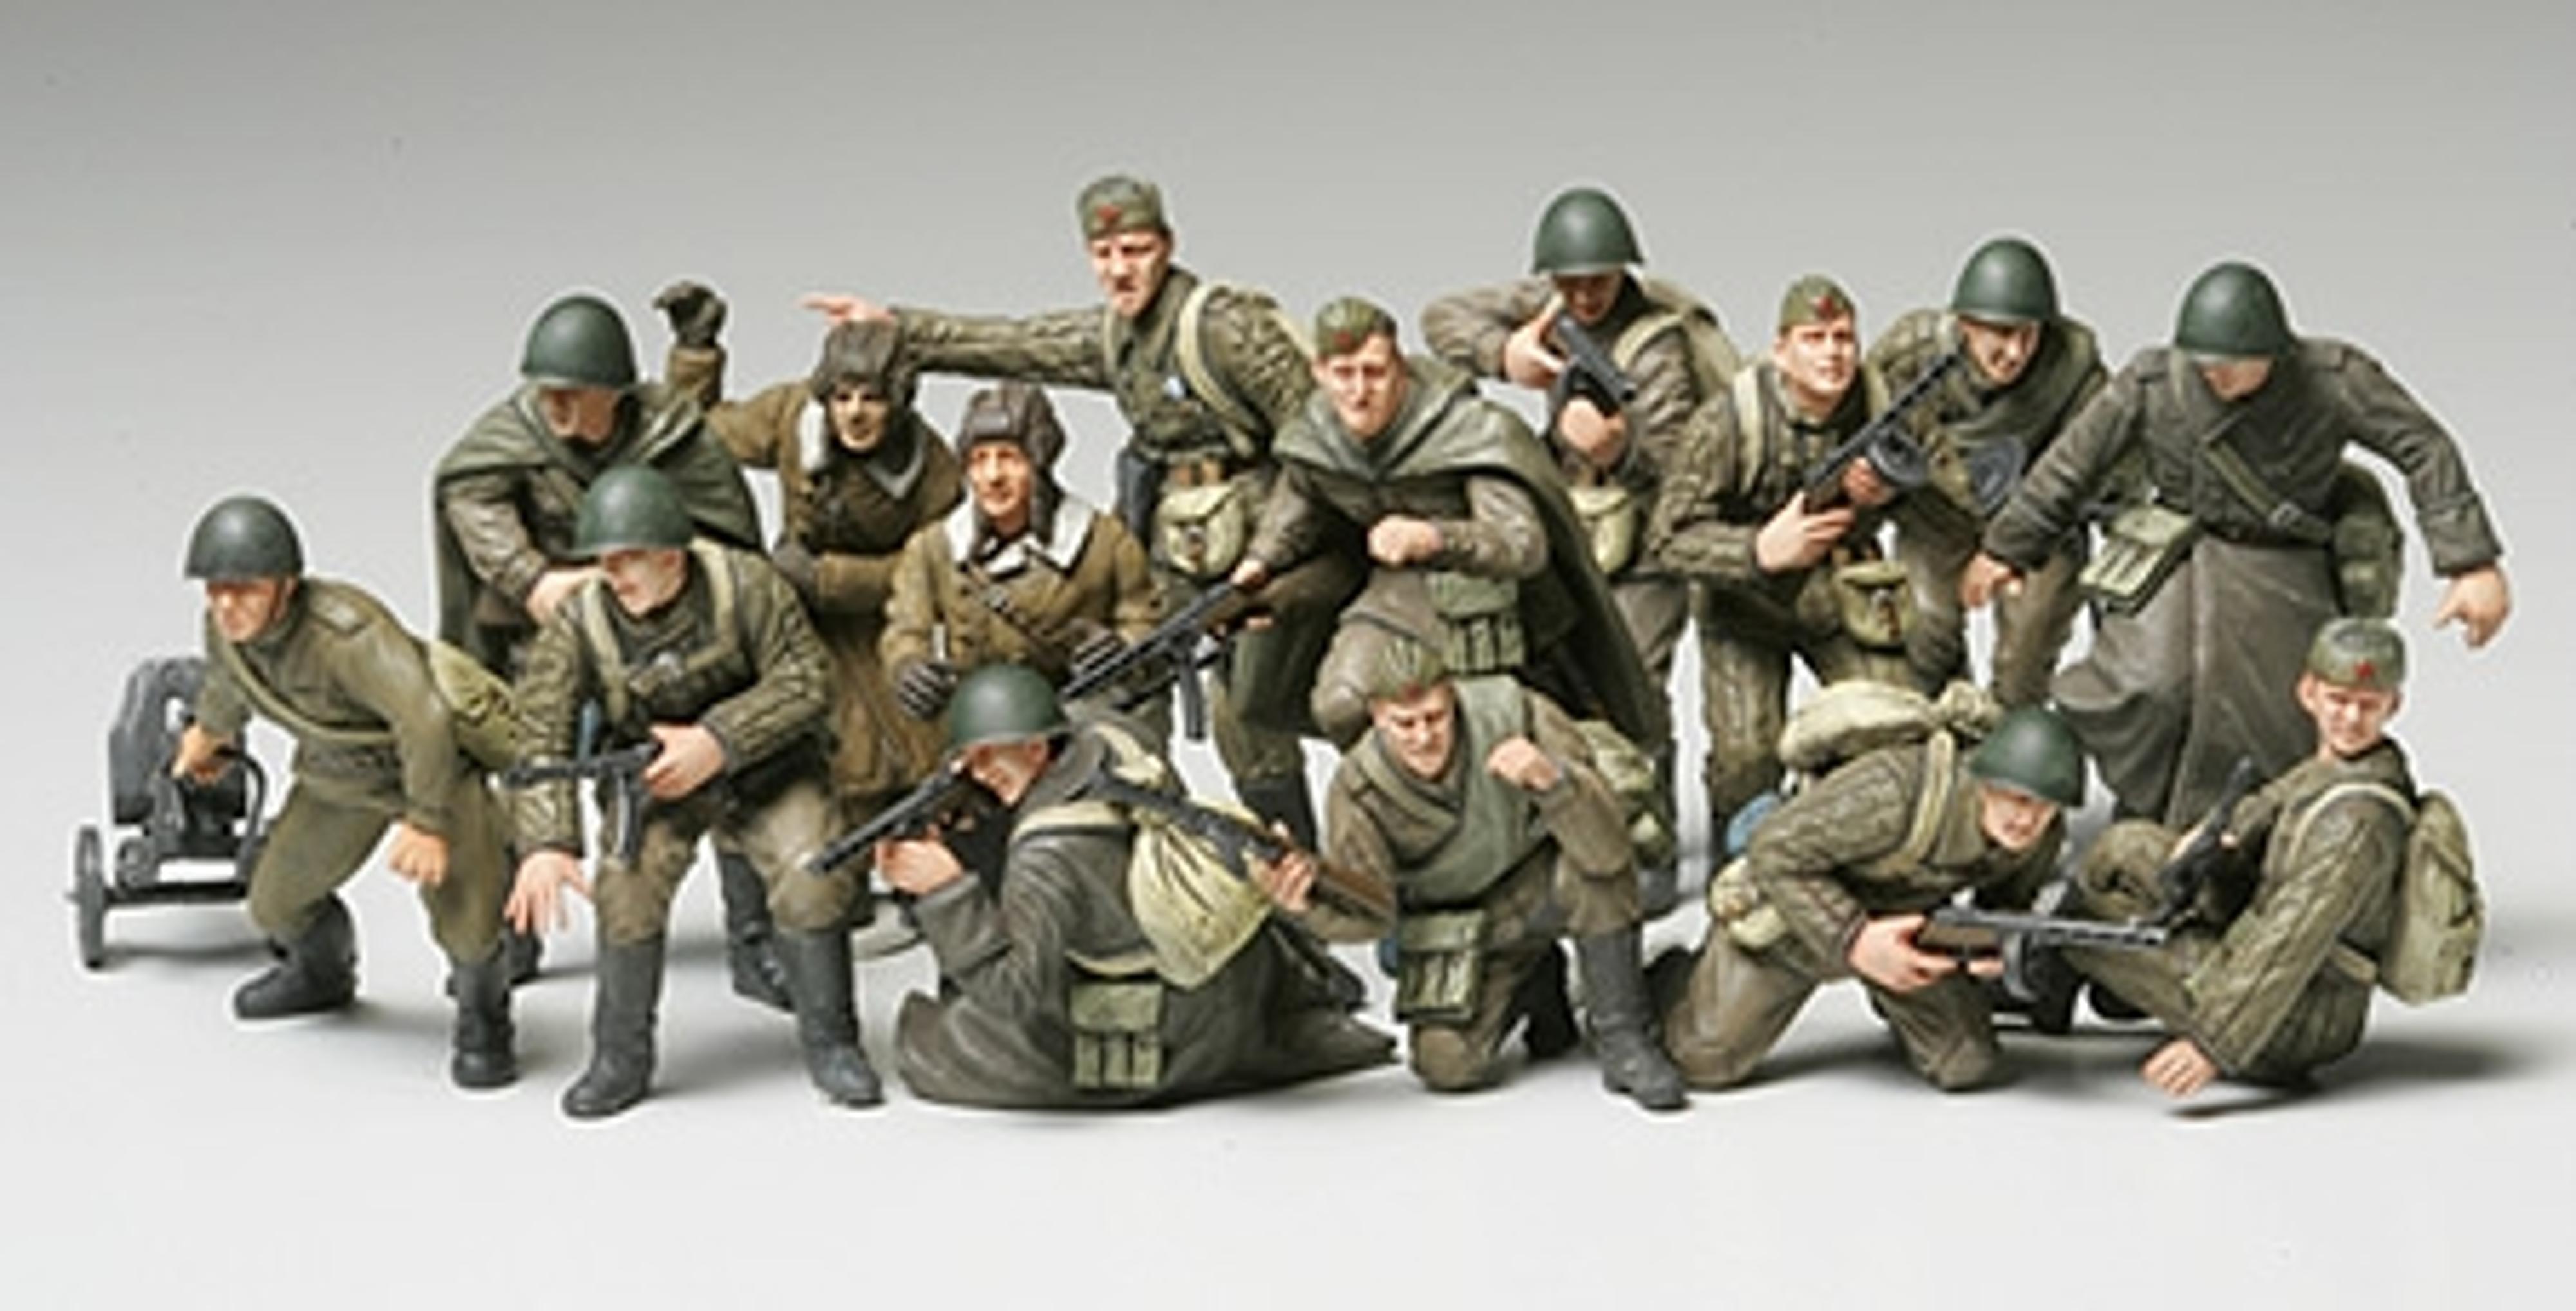 1/48 WWII Russian Infantry/Tank Crew Figures